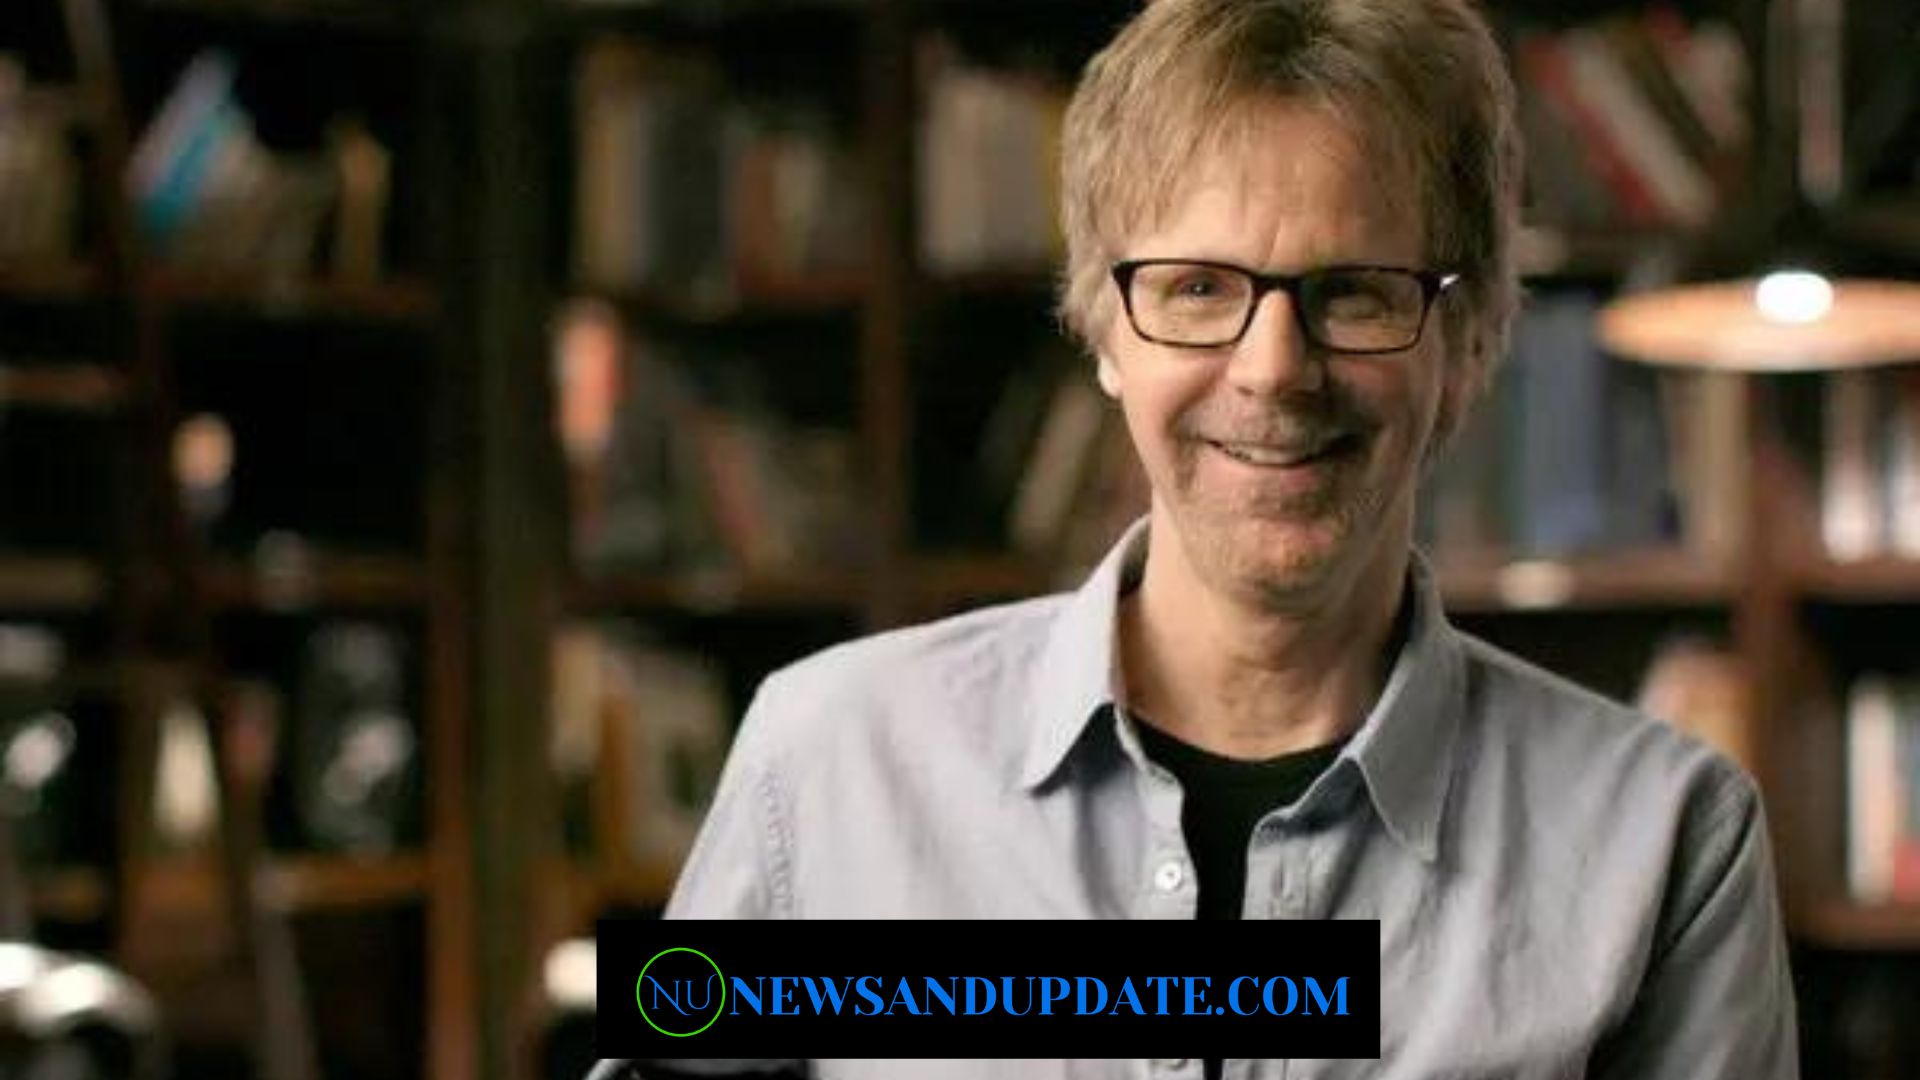 All You Need To Know About Dana Carvey!